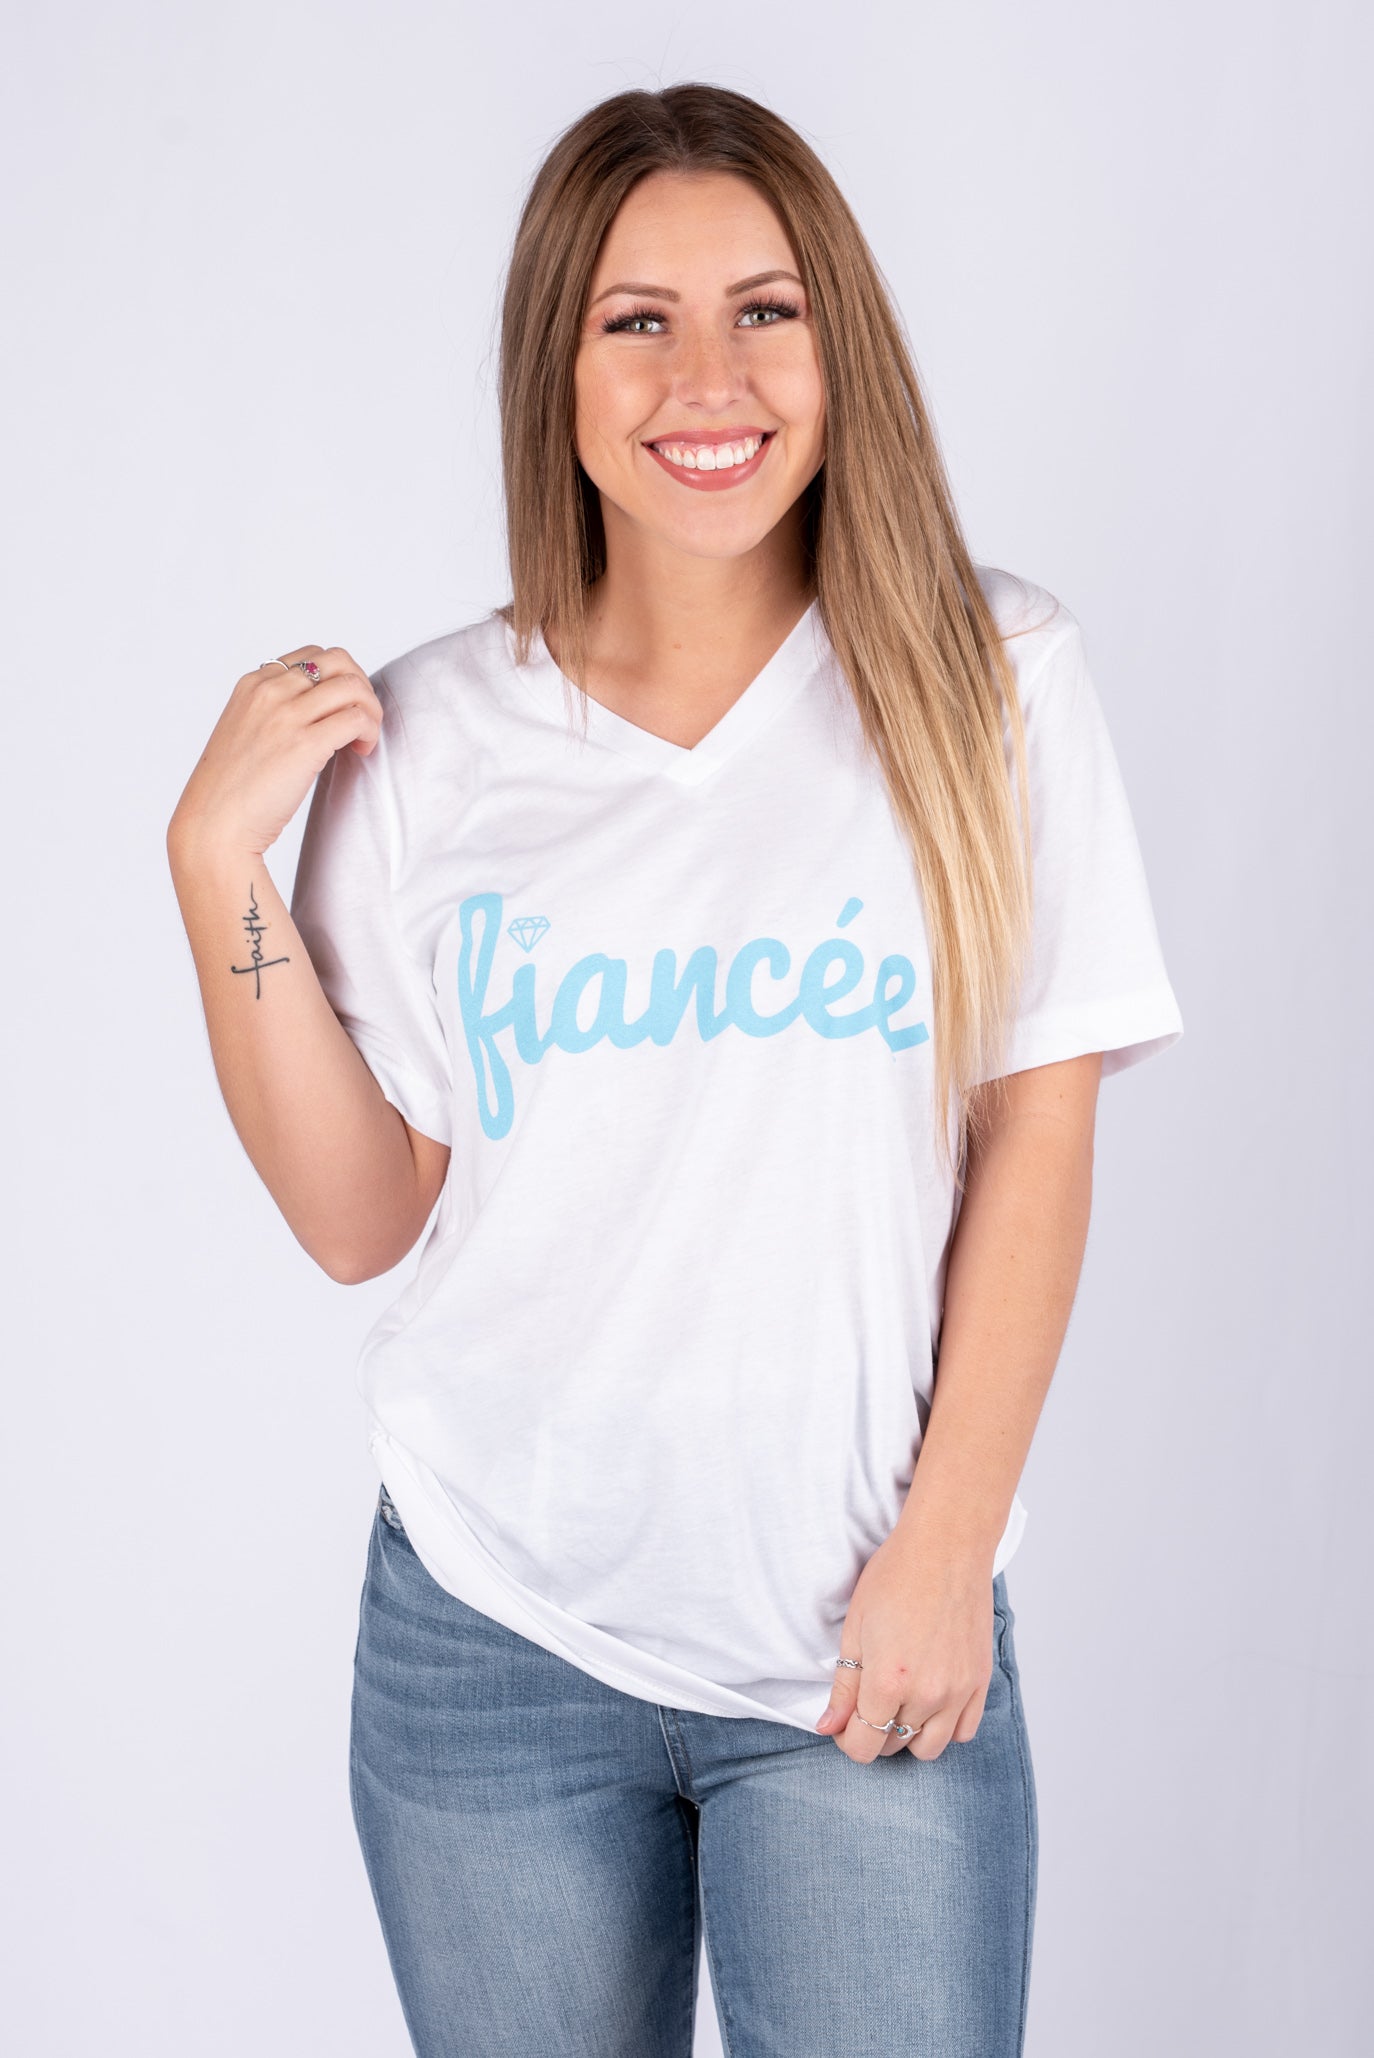 Fiancee v-neck short sleeve t-shirt white - Cute T-shirts - Funny T-Shirts at Lush Fashion Lounge Boutique in Oklahoma City